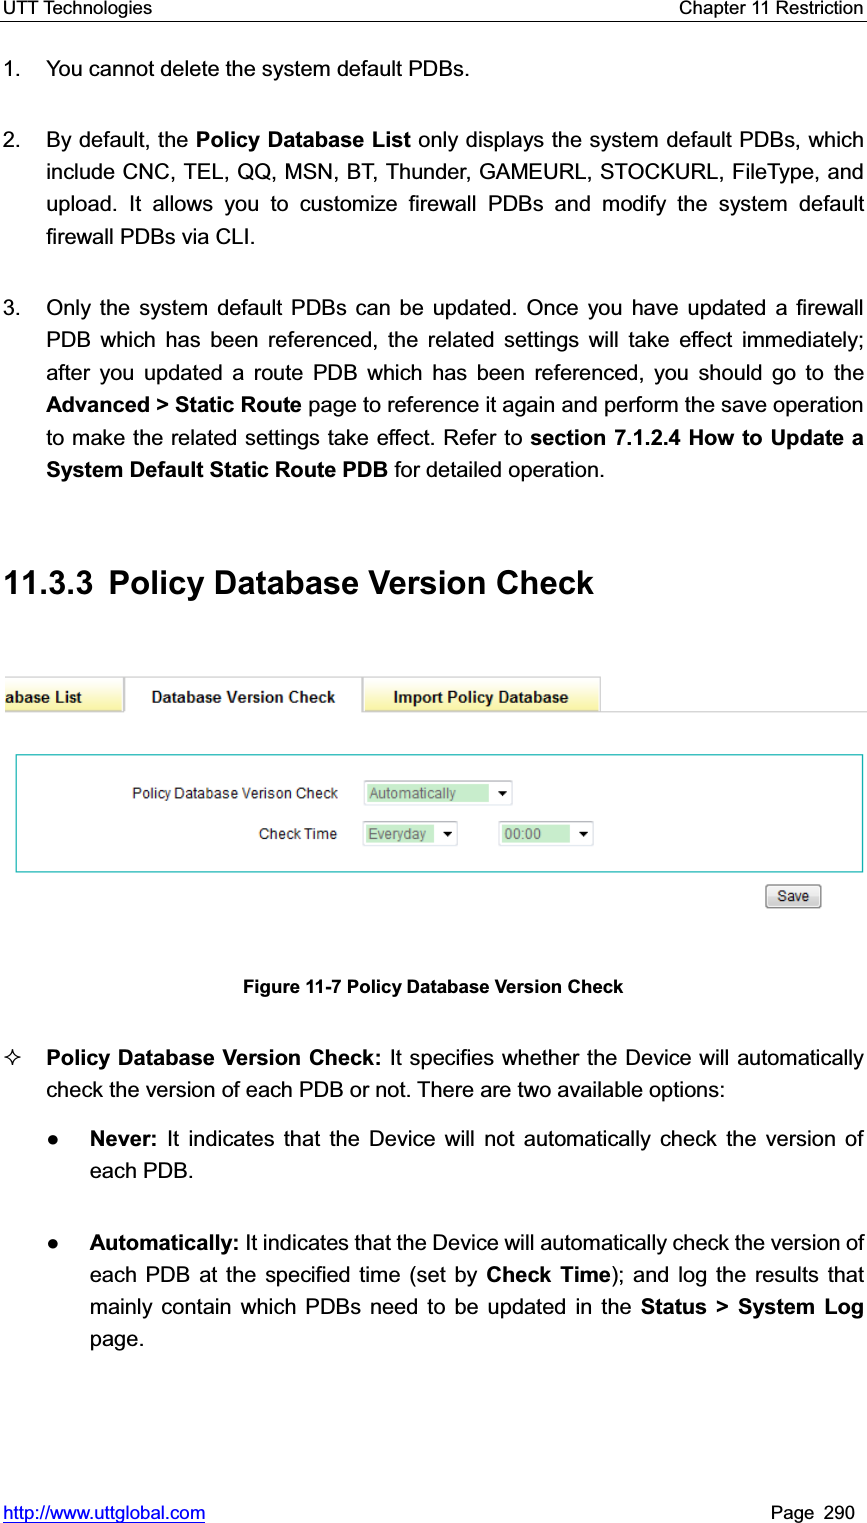 UTT Technologies    Chapter 11 Restriction   http://www.uttglobal.com Page 290 1.  You cannot delete the system default PDBs. 2. By default, the Policy Database List only displays the system default PDBs, which include CNC, TEL, QQ, MSN, BT, Thunder, GAMEURL, STOCKURL, FileType, and upload. It allows you to customize firewall PDBs and modify the system default firewall PDBs via CLI. 3.  Only the system default PDBs can be updated. Once you have updated a firewall PDB which has been referenced, the related settings will take effect immediately; after you updated a route PDB which has been referenced, you should go to theAdvanced &gt; Static Route page to reference it again and perform the save operation to make the related settings take effect. Refer to section 7.1.2.4 How to Update a System Default Static Route PDB for detailed operation. 11.3.3  Policy Database Version Check Figure 11-7 Policy Database Version Check Policy Database Version Check: It specifies whether the Device will automatically check the version of each PDB or not. There are two available options:   ƔNever:  It indicates that the Device will not automatically check the version of each PDB.   ƔAutomatically: It indicates that the Device will automatically check the version of each PDB at the specified time (set by Check Time); and log the results that mainly contain which PDBs need to be updated in the Status &gt; System Log page. 